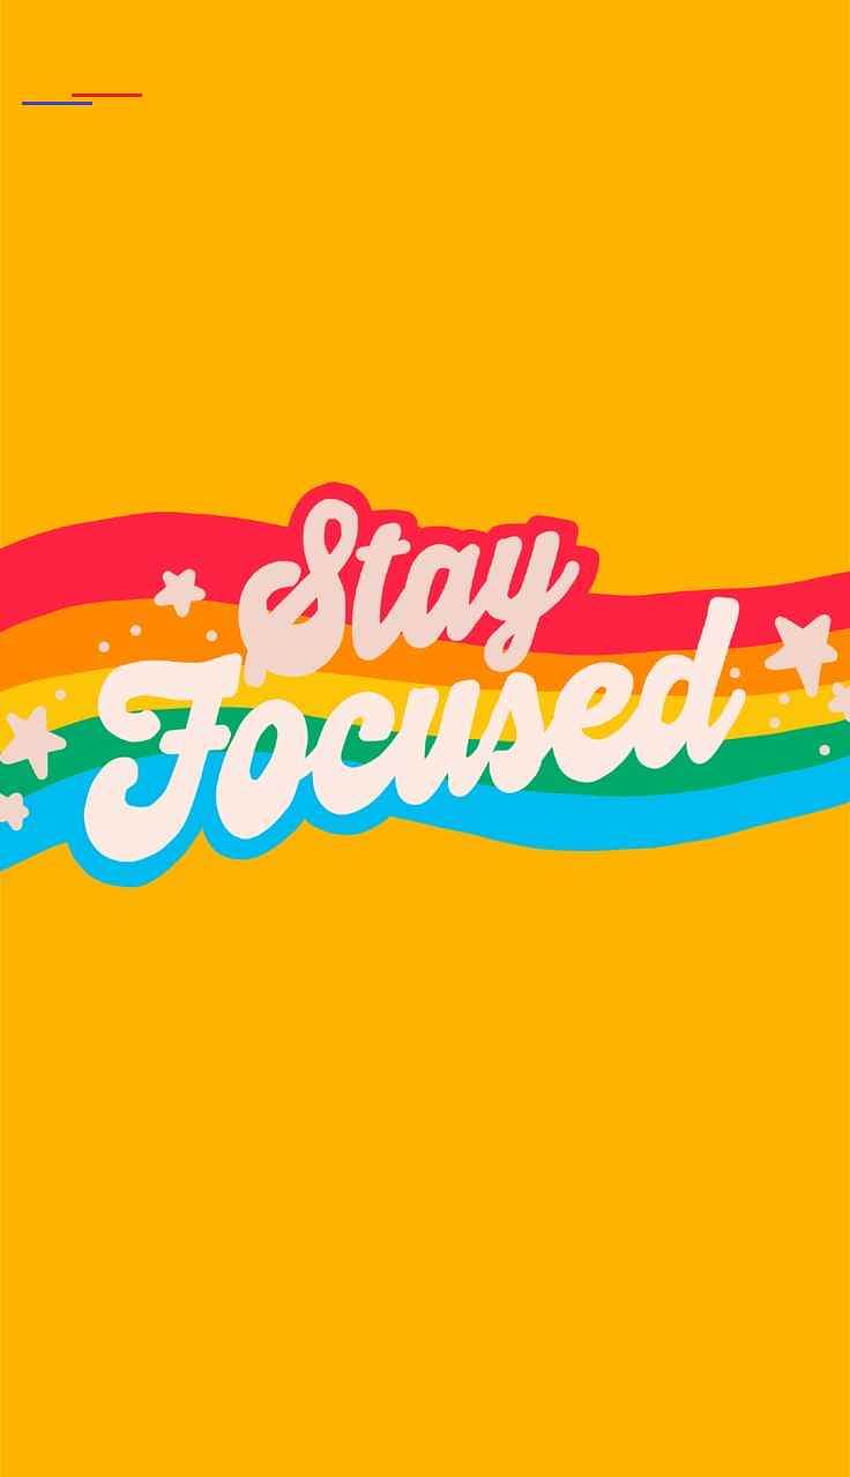 Stay Focused Wallpapers  Wallpaper Cave